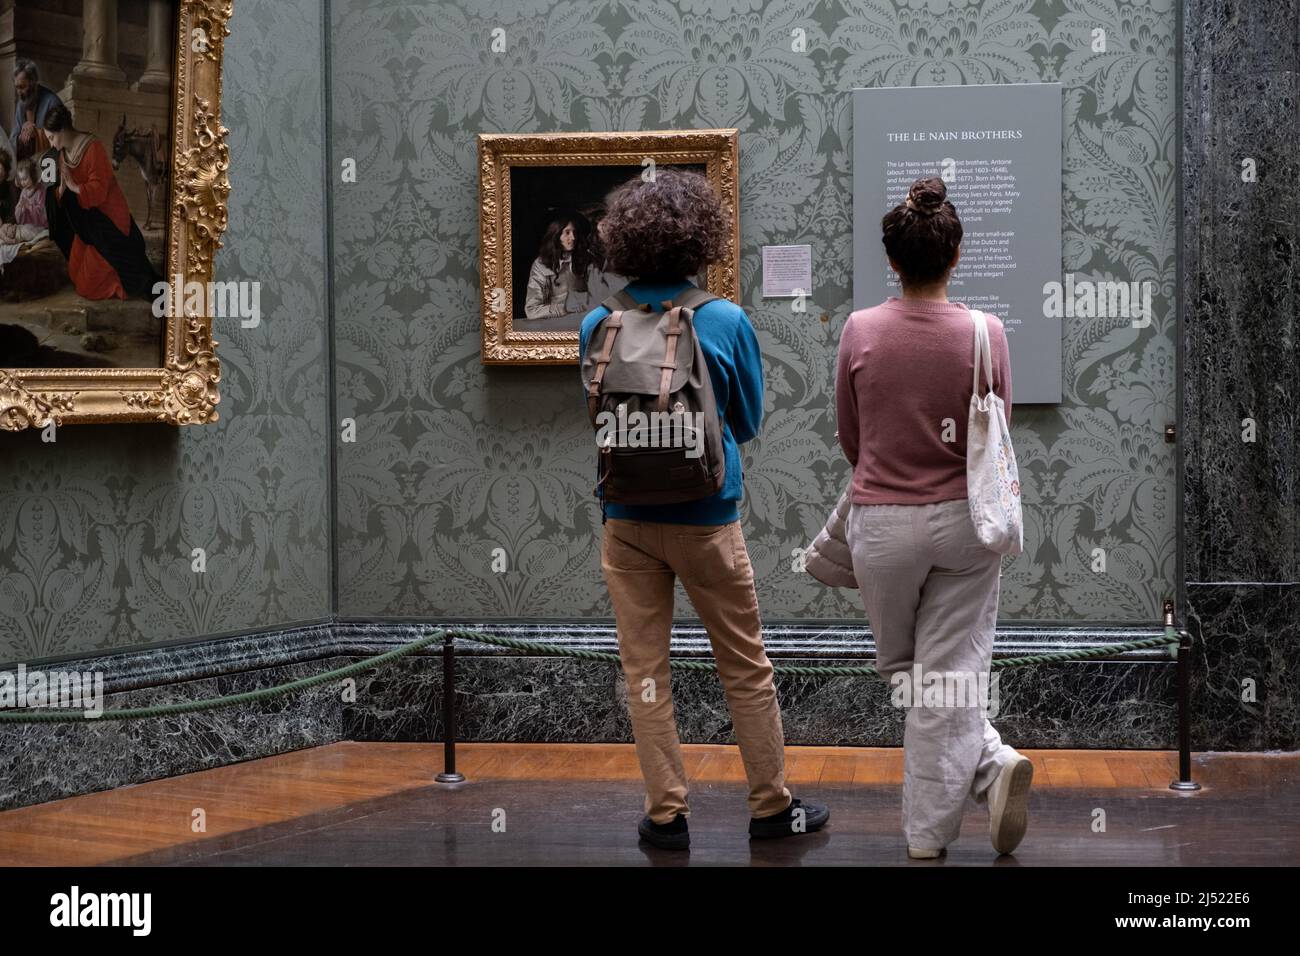 Looking at art in The National Gallery in London, England. Stock Photo